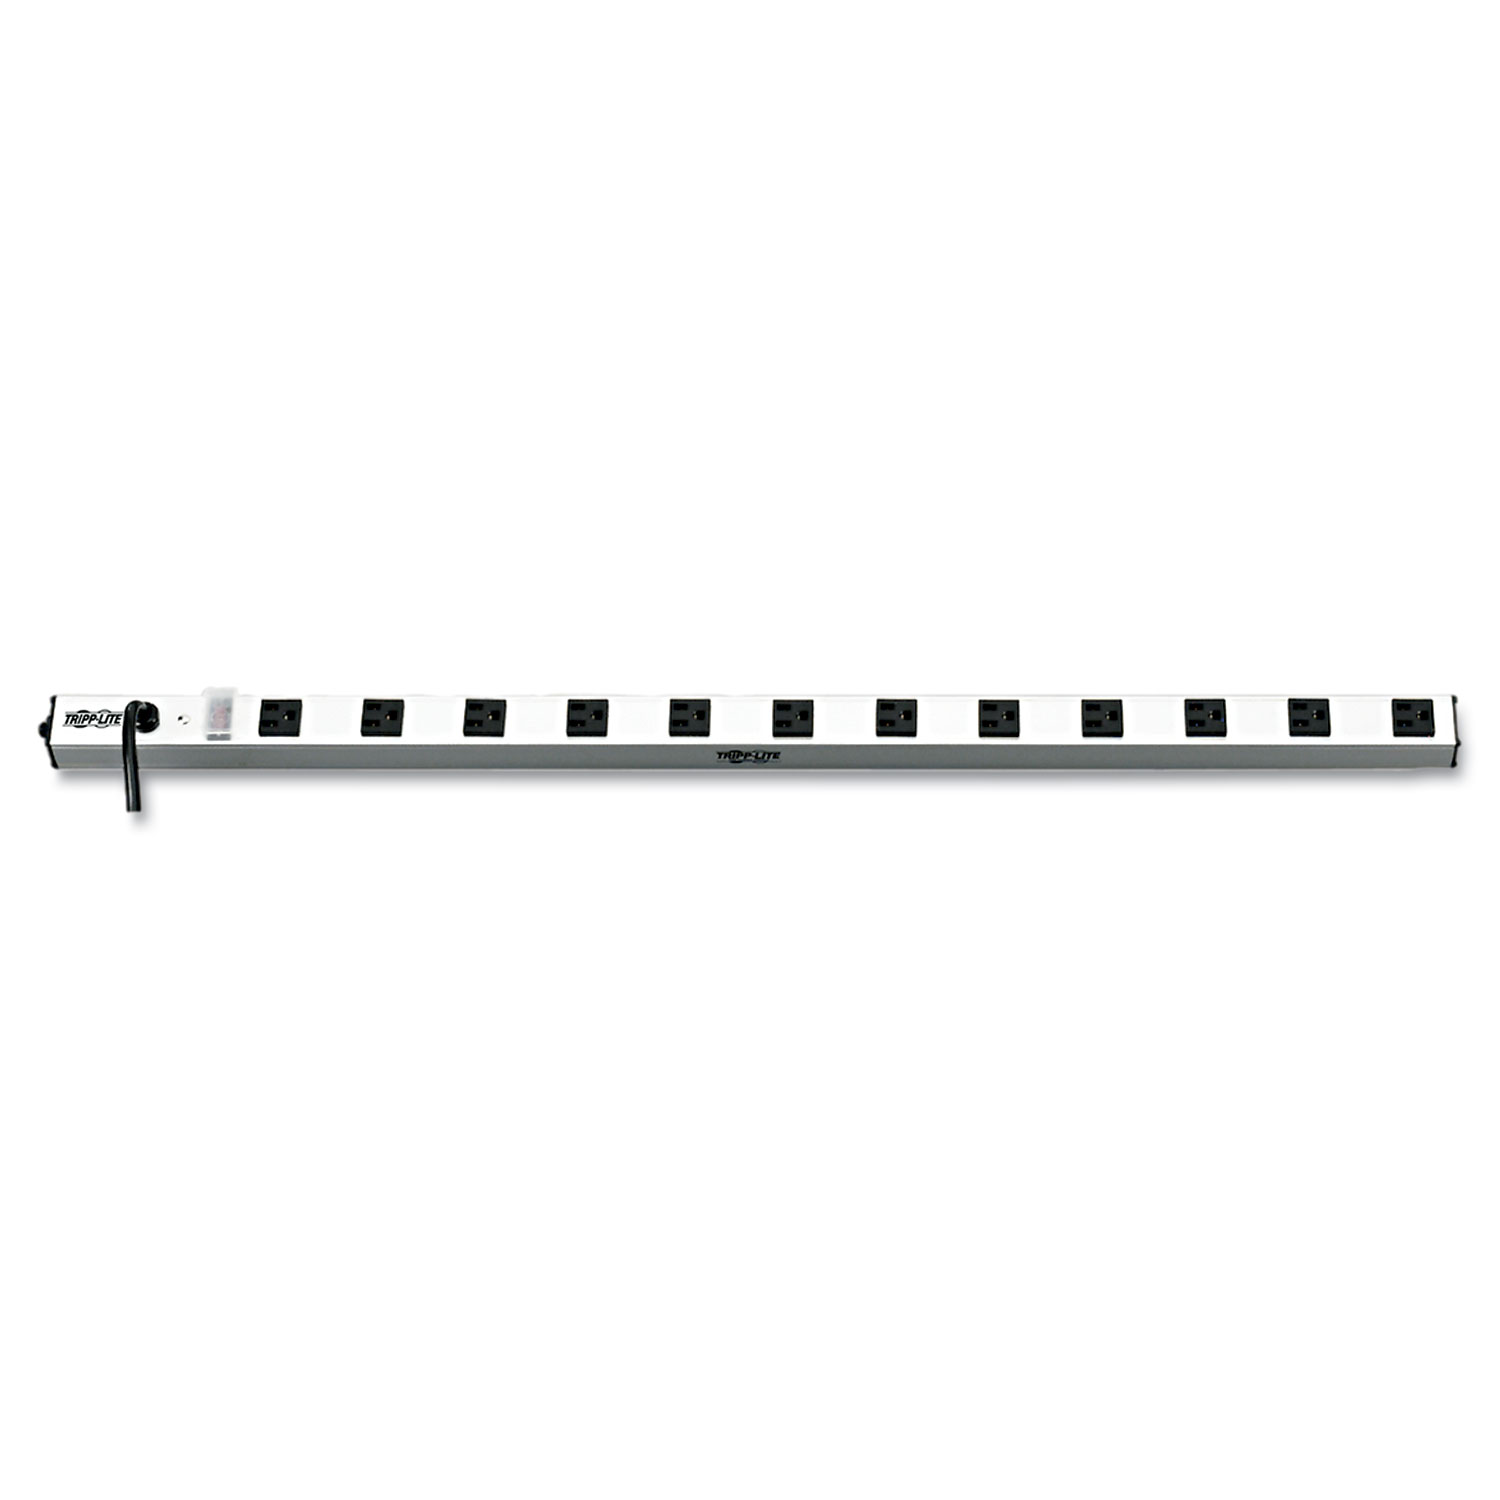 Vertical Power Strip, 12 Outlets, 1 1/2 x 36 x 1 1/2, 15 ft Cord, Silver